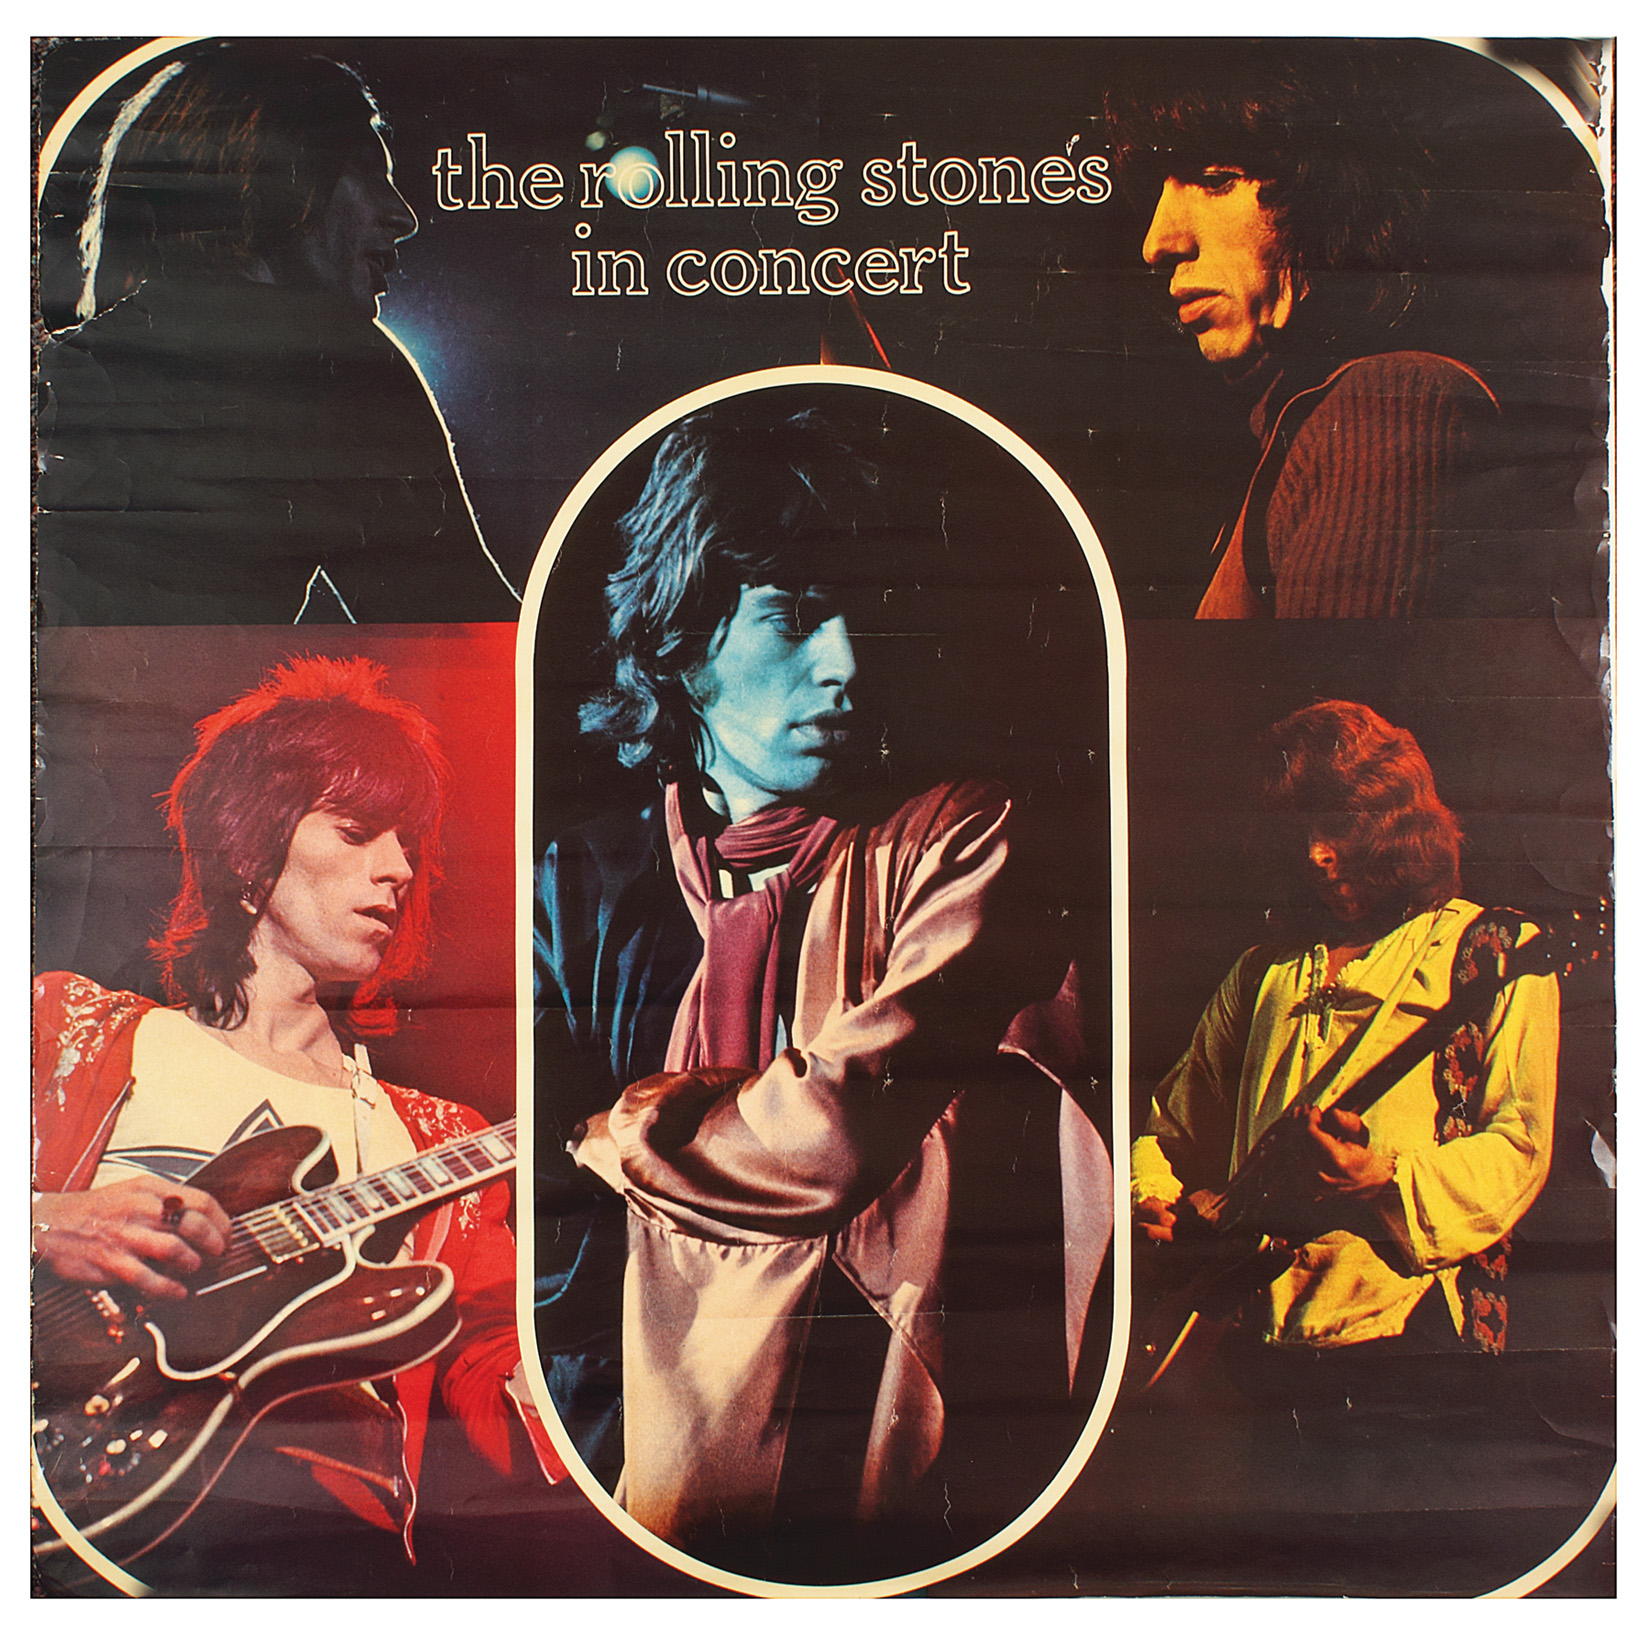 The rolling stones angie. Роллинг стоунз Анджей. Angie the Rolling Stones. The Rolling Stones Midnight rambler. Роллинг стоунз Angie фото.